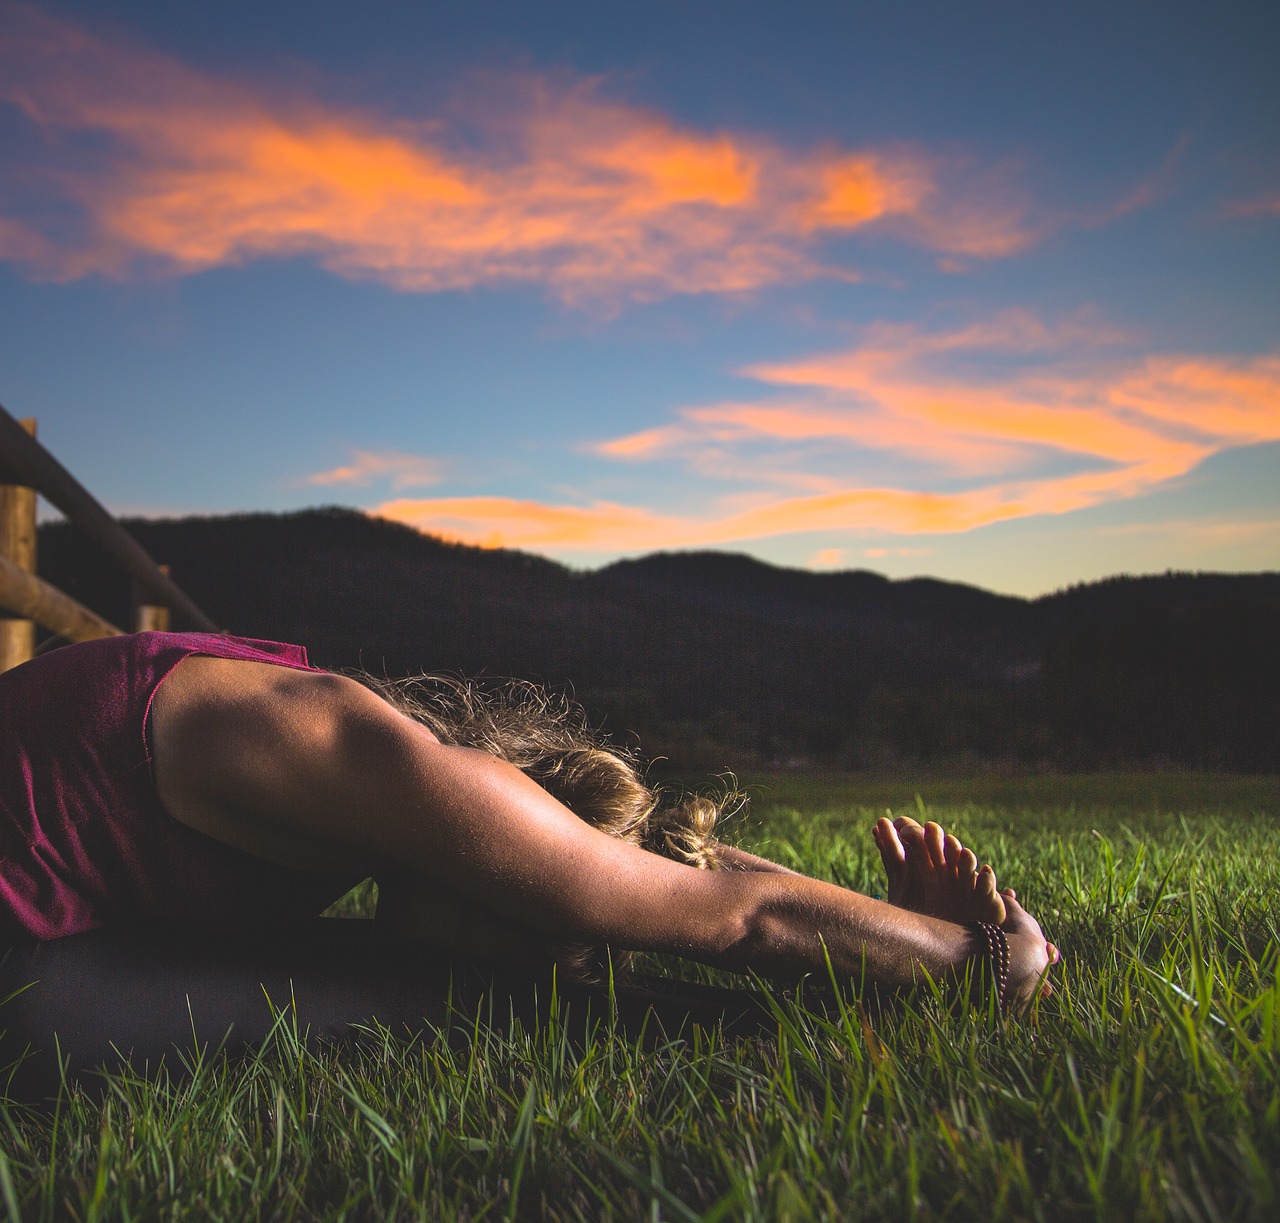 Download free photo of Adult,dawn,exercise,field,girl - from needpix.com